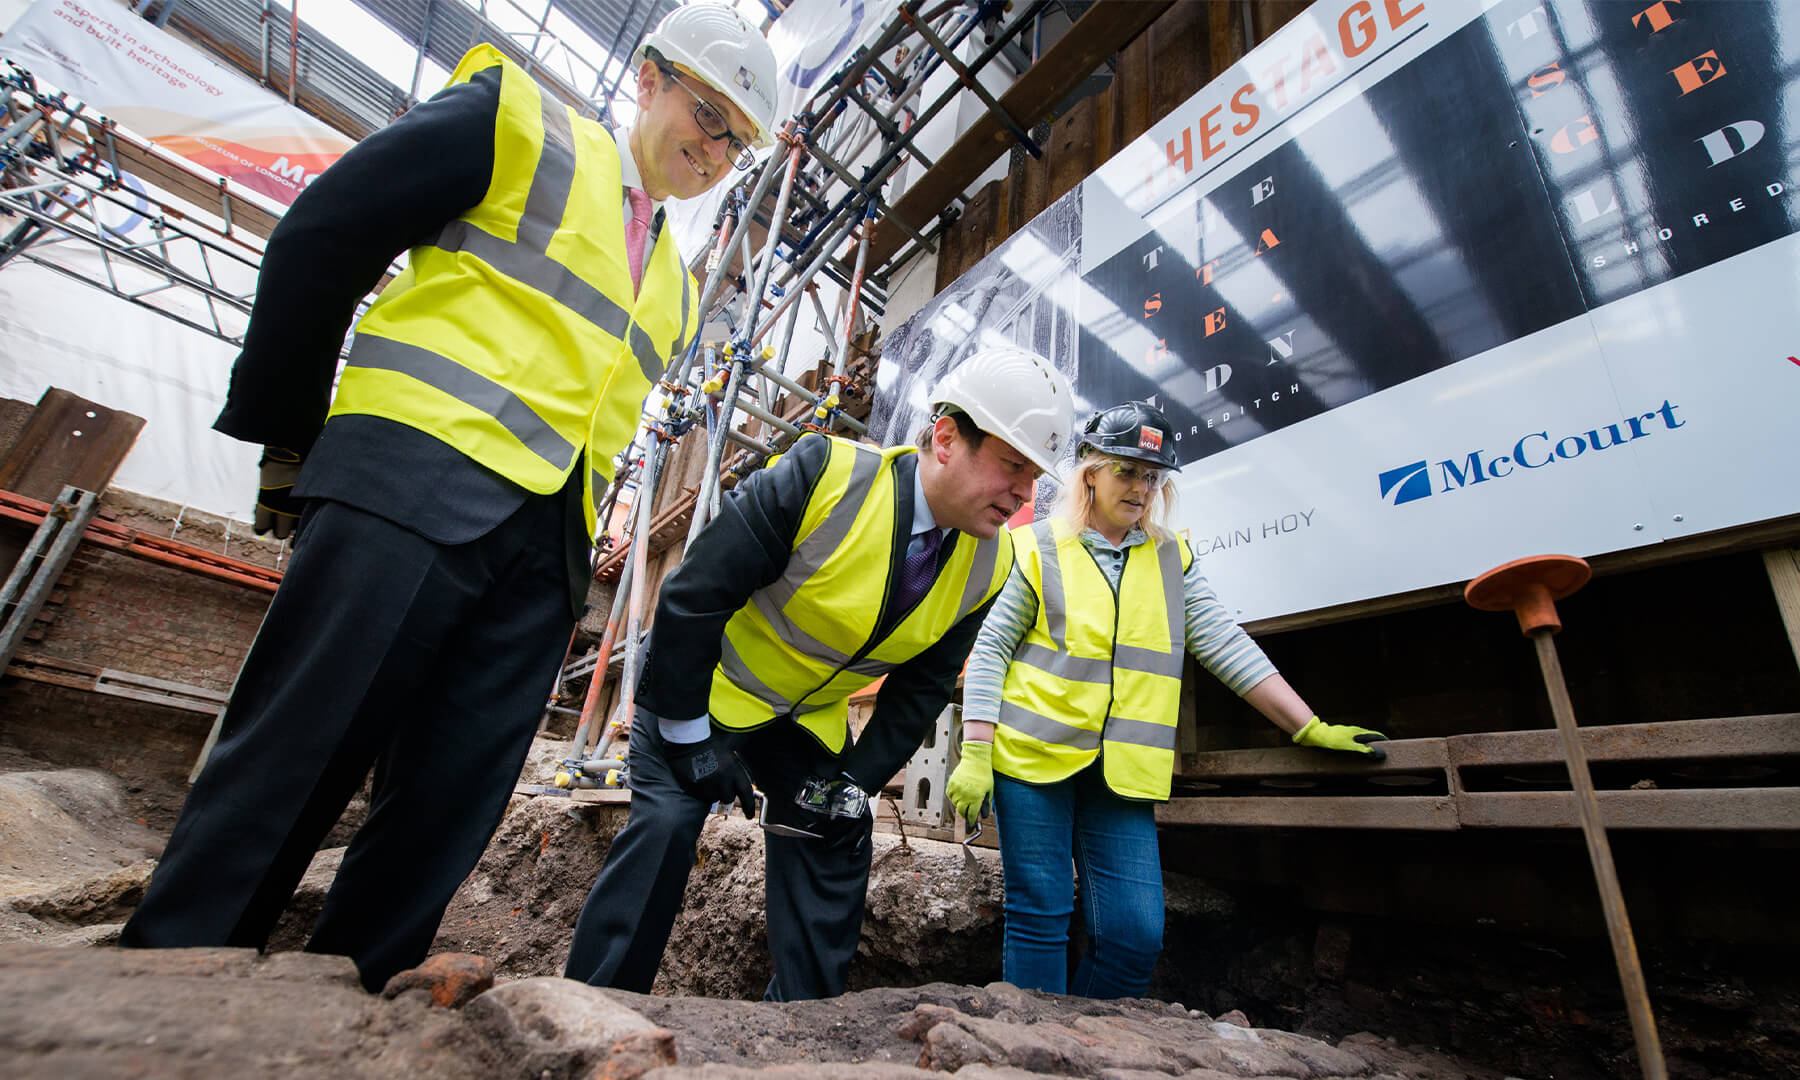 Jonathan Goldstein, Ed Vaizey and Heather Knight at the excavation of the Curtain Theatre